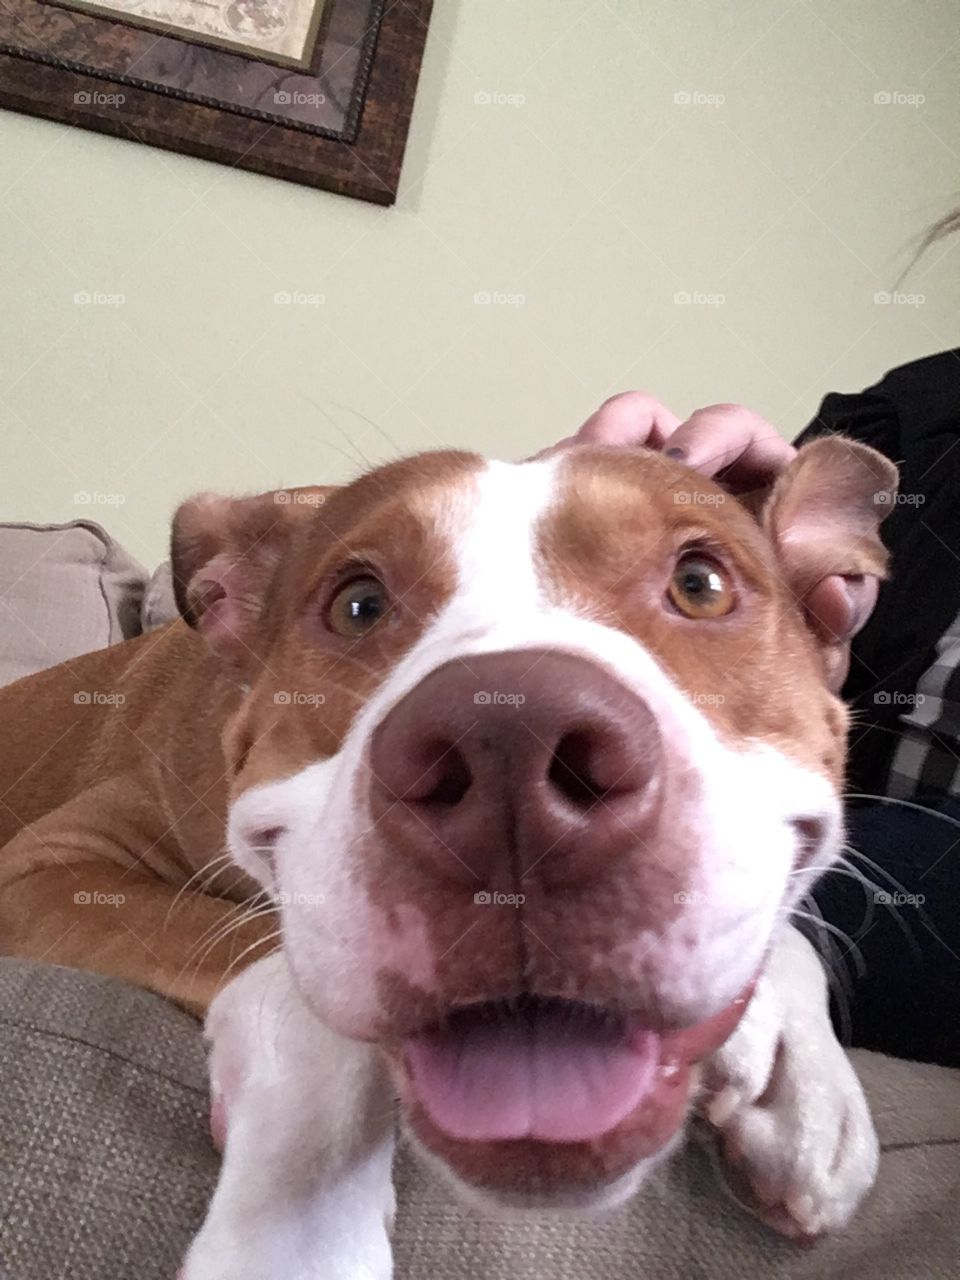 The most adorable rescue pitbull ever with tongue sticking out smiling 